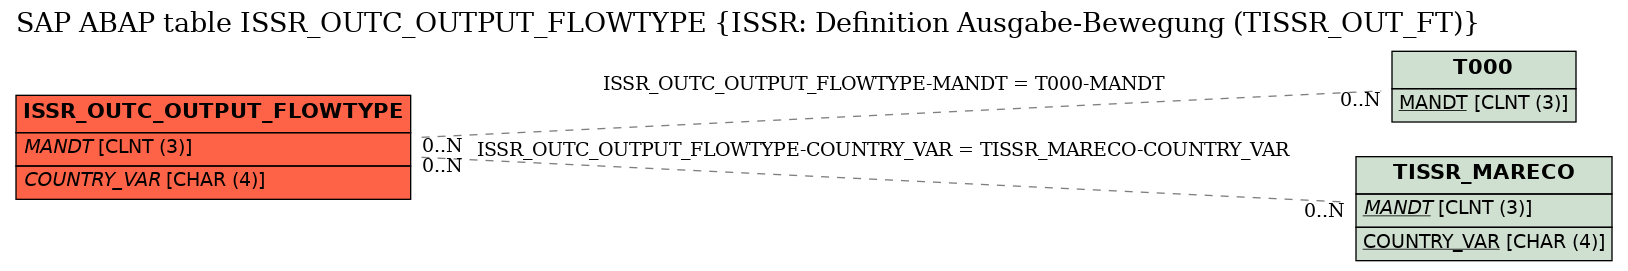 E-R Diagram for table ISSR_OUTC_OUTPUT_FLOWTYPE (ISSR: Definition Ausgabe-Bewegung (TISSR_OUT_FT))